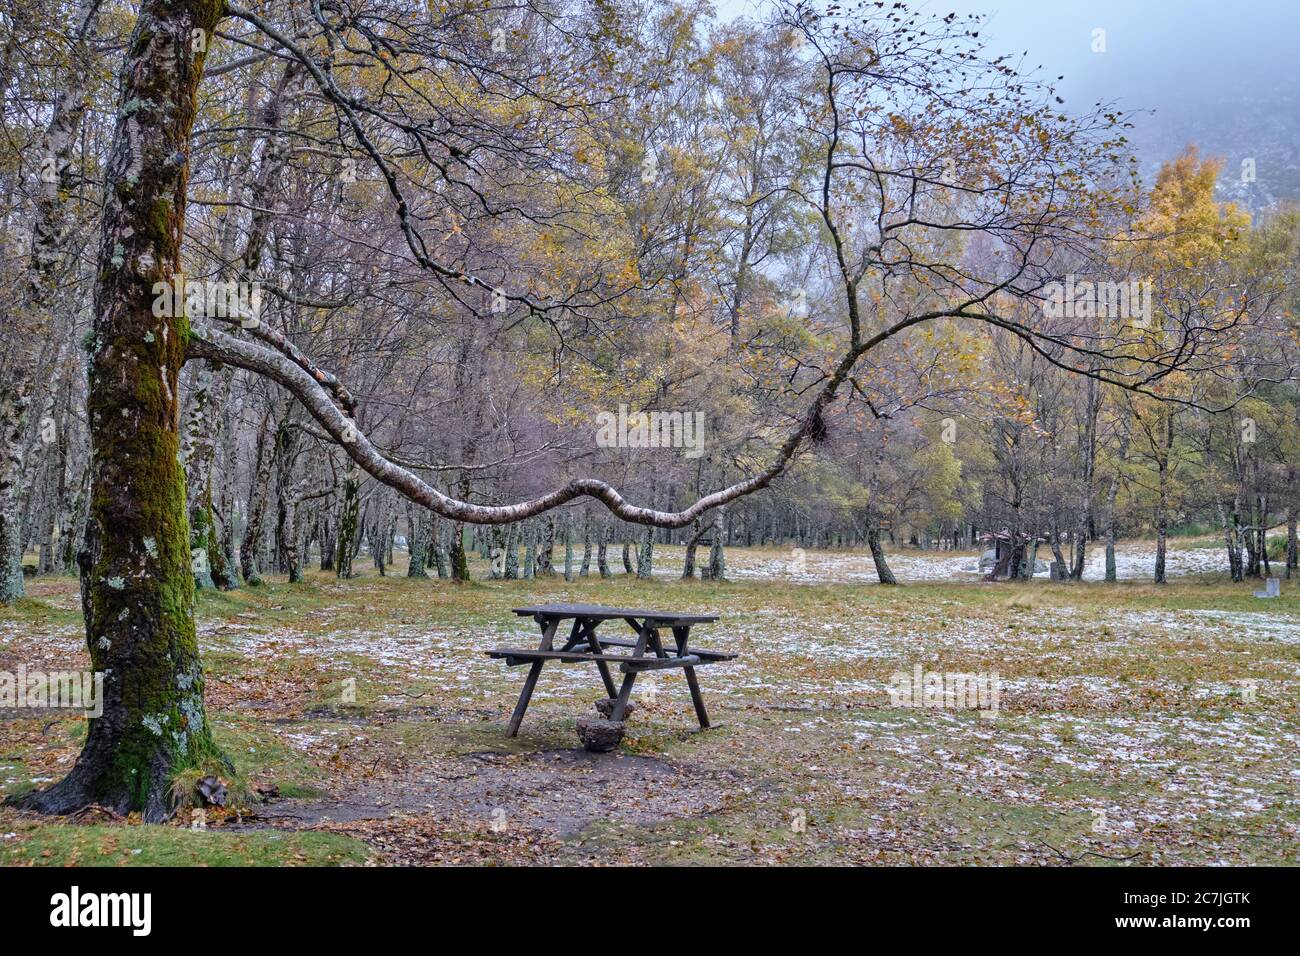 Covao D'Ametade park covered in greenery and fog during the autumn in Portugal Stock Photo